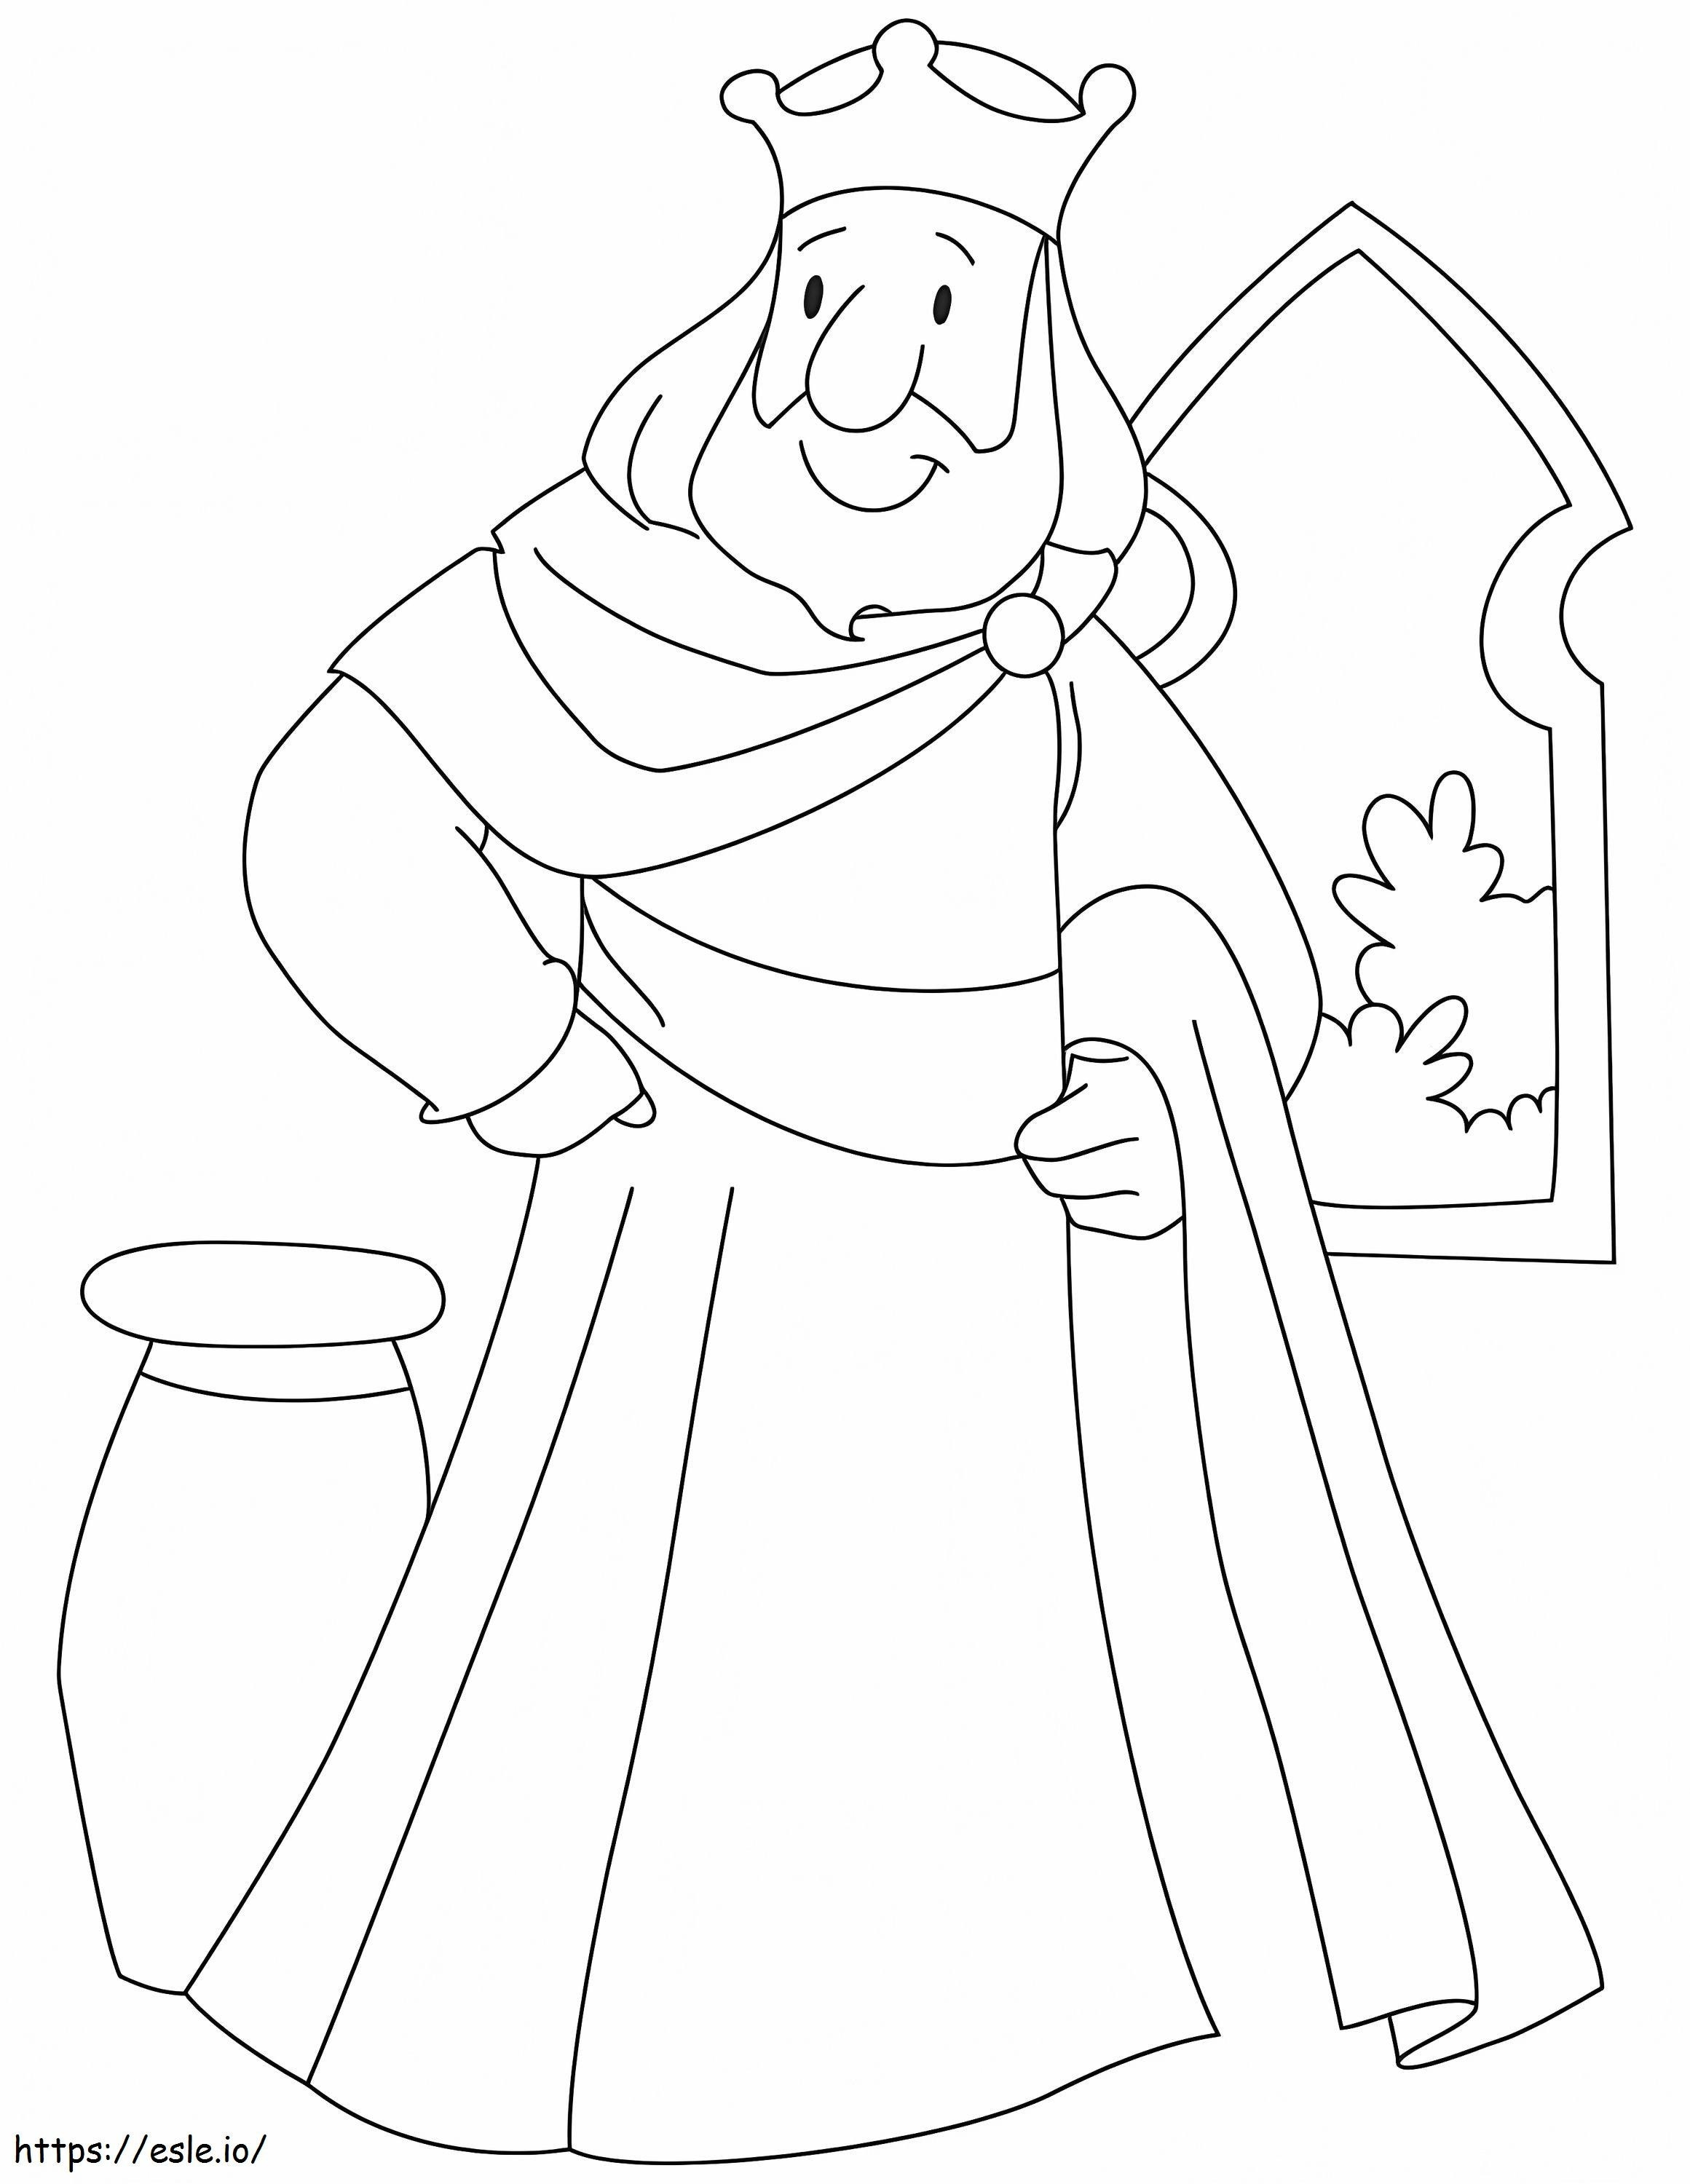 King Smiling coloring page